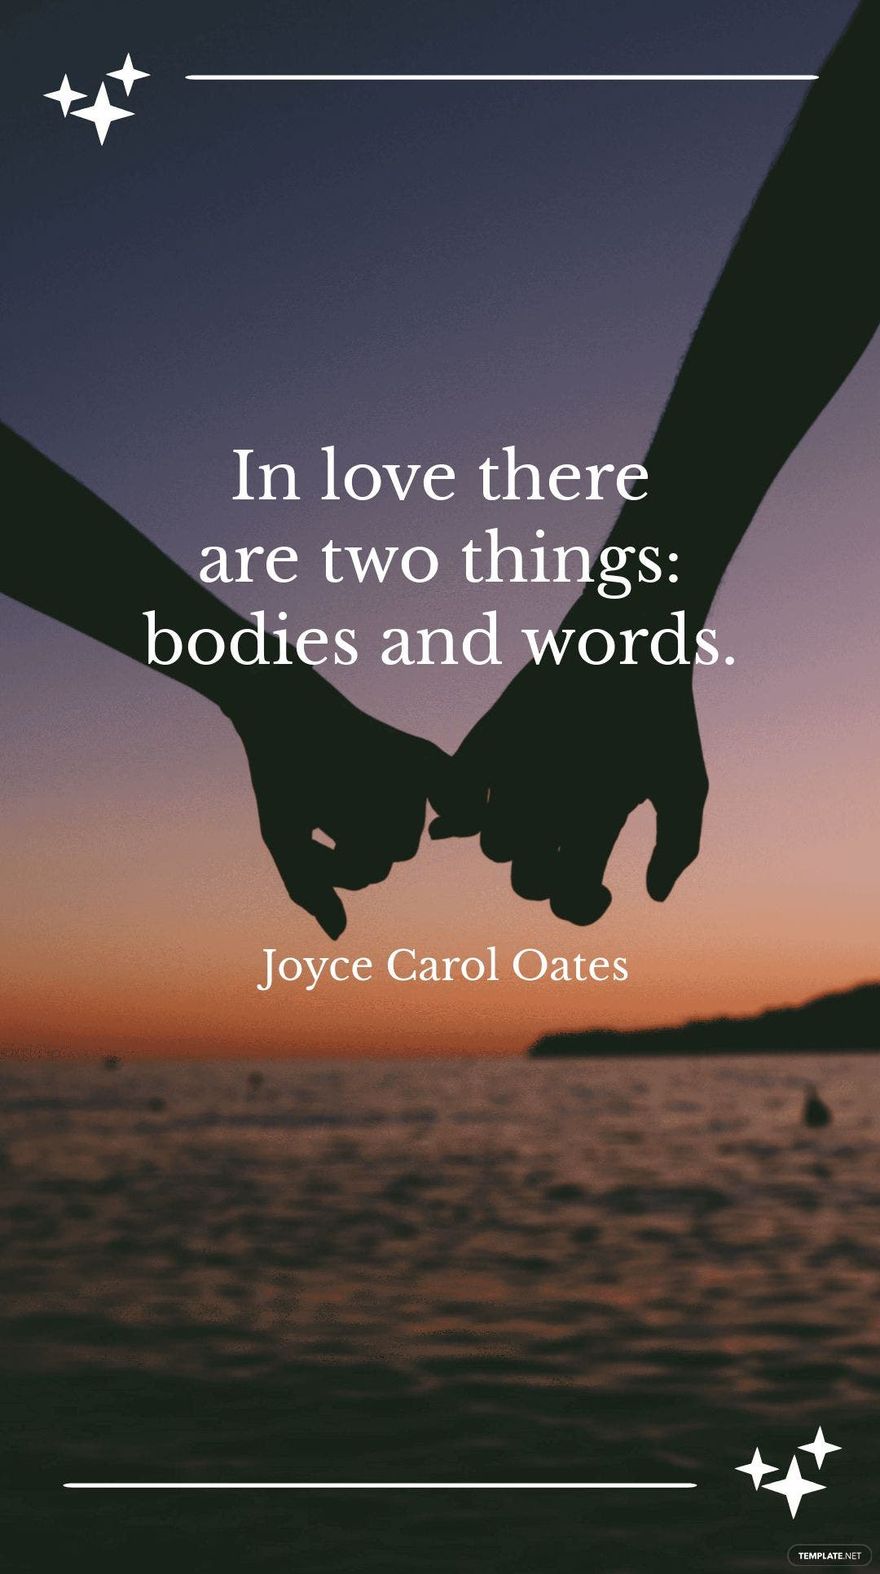 Joyce Carol Oates - "In love there are two things: bodies and words." 